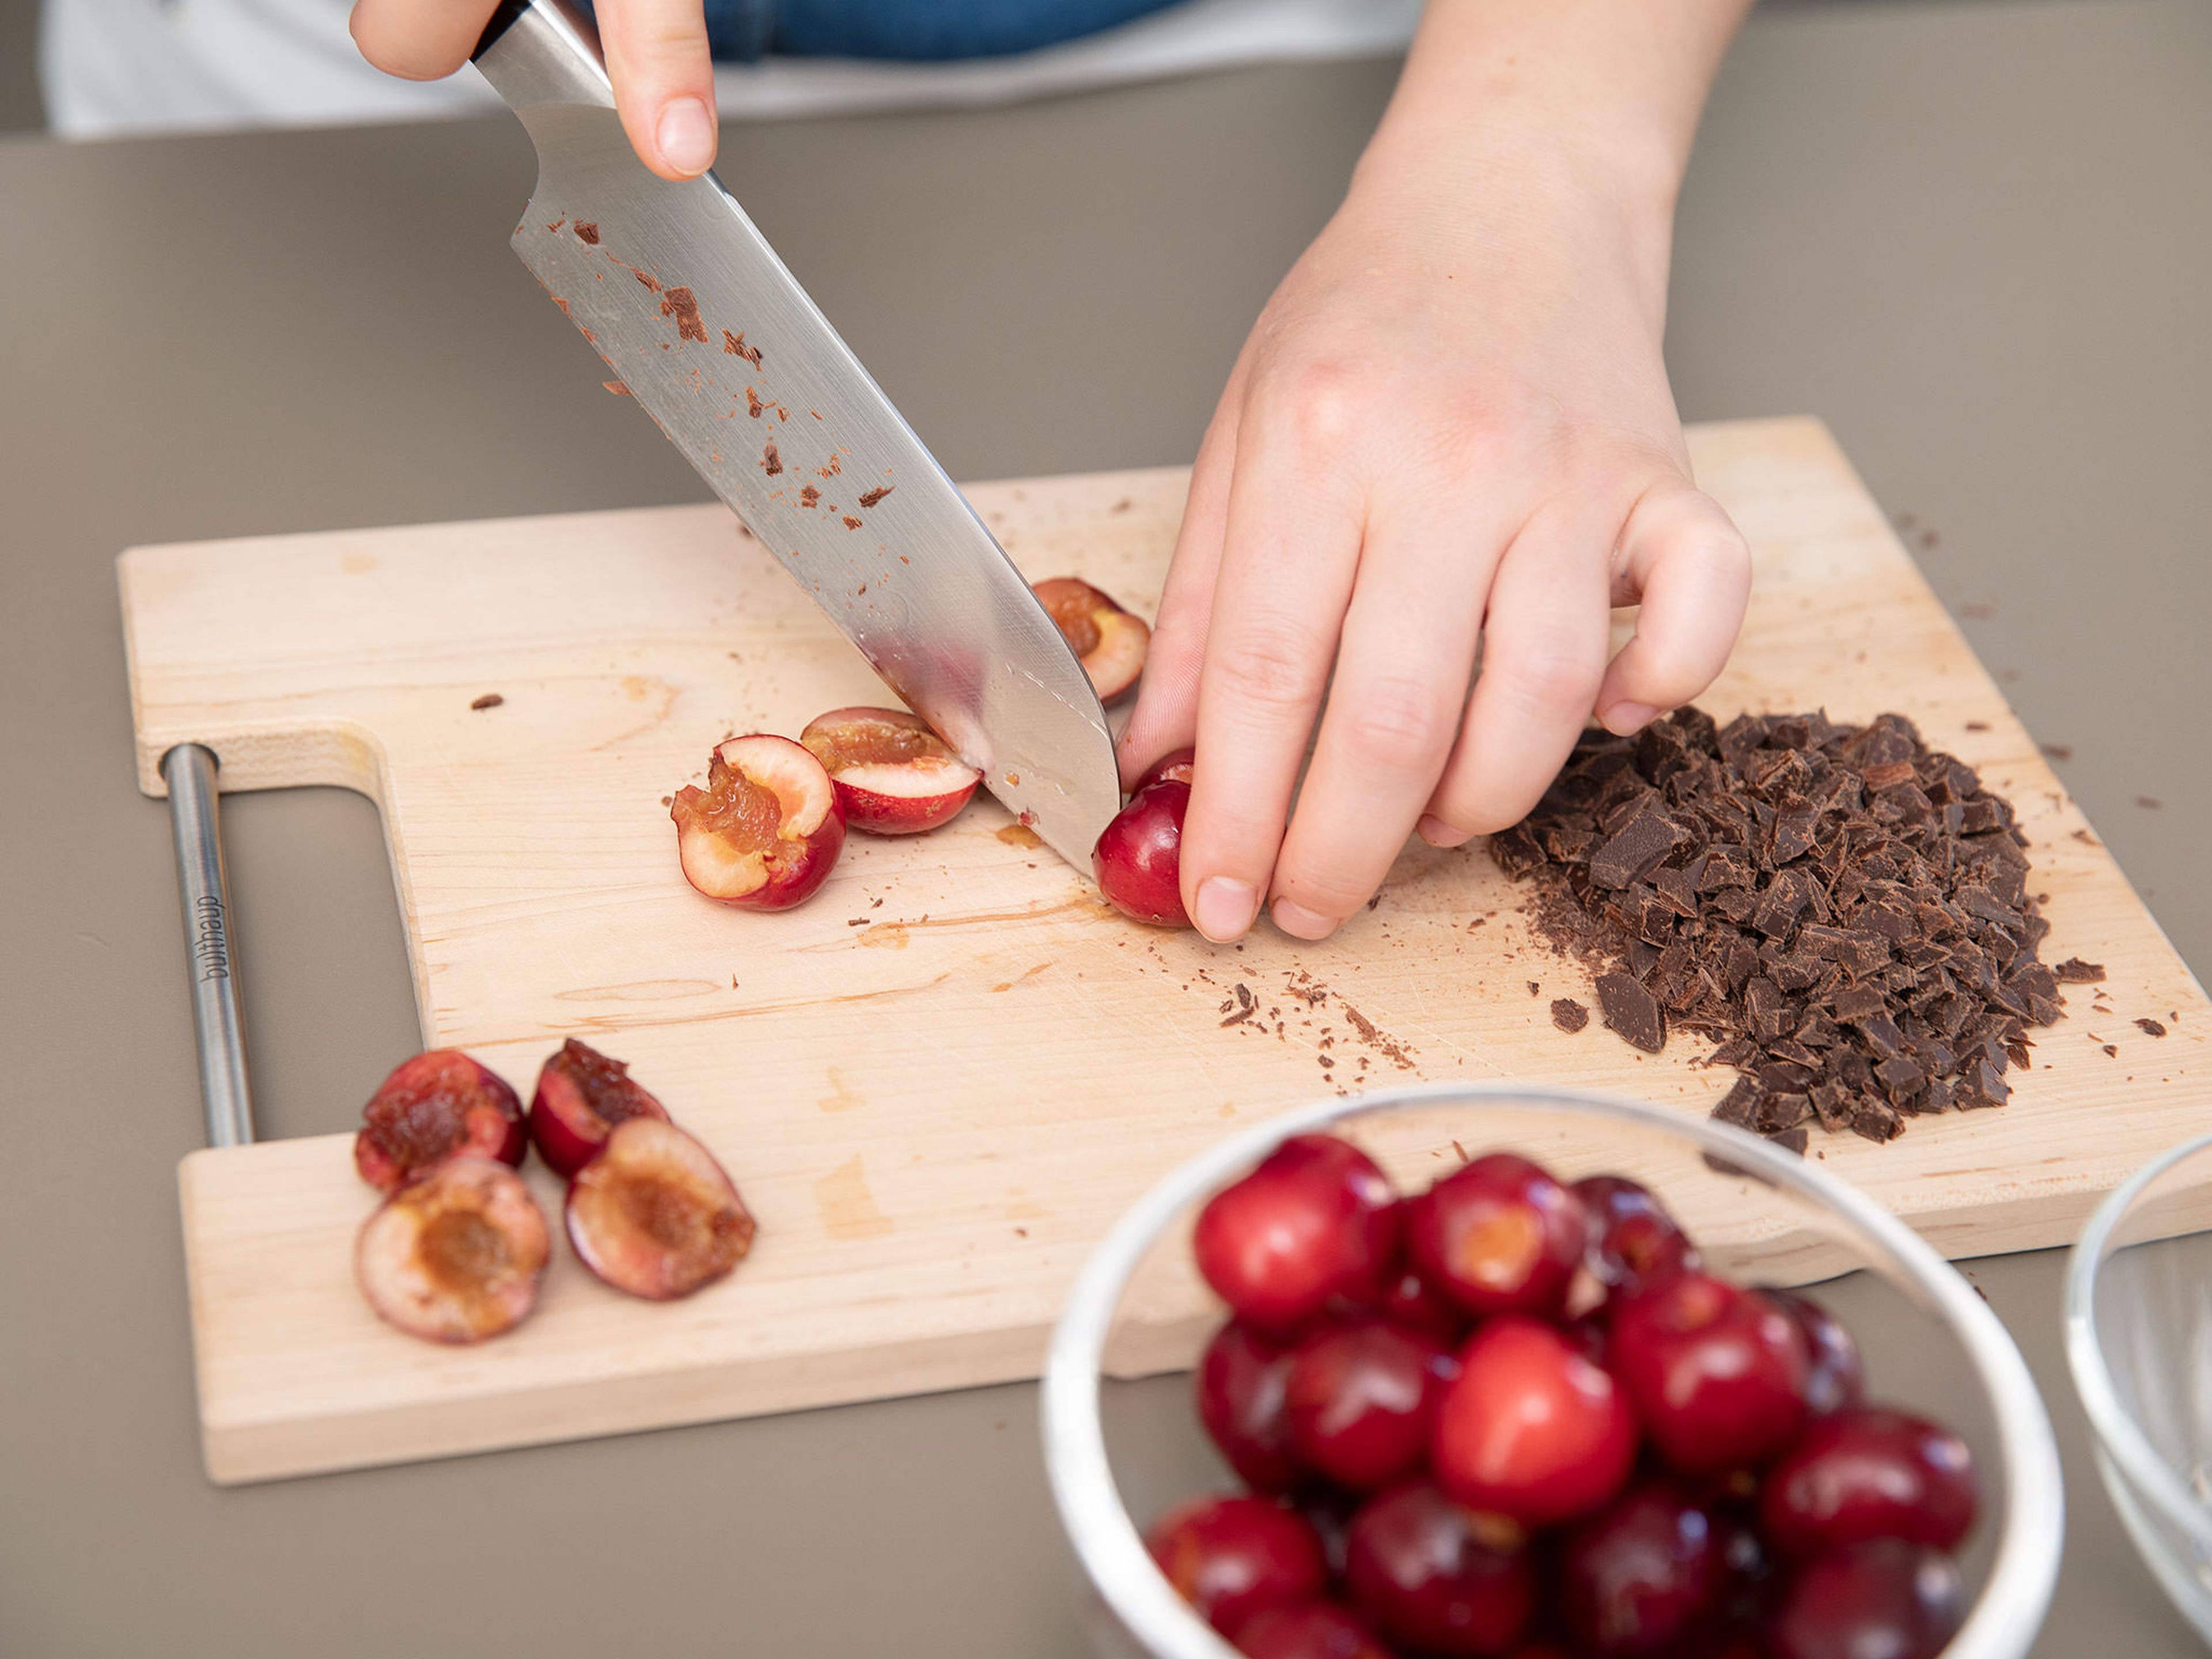 Finely chop chocolate. Halve cherries, remove pit, and cut into small pieces. Add to dough and stir to combine.